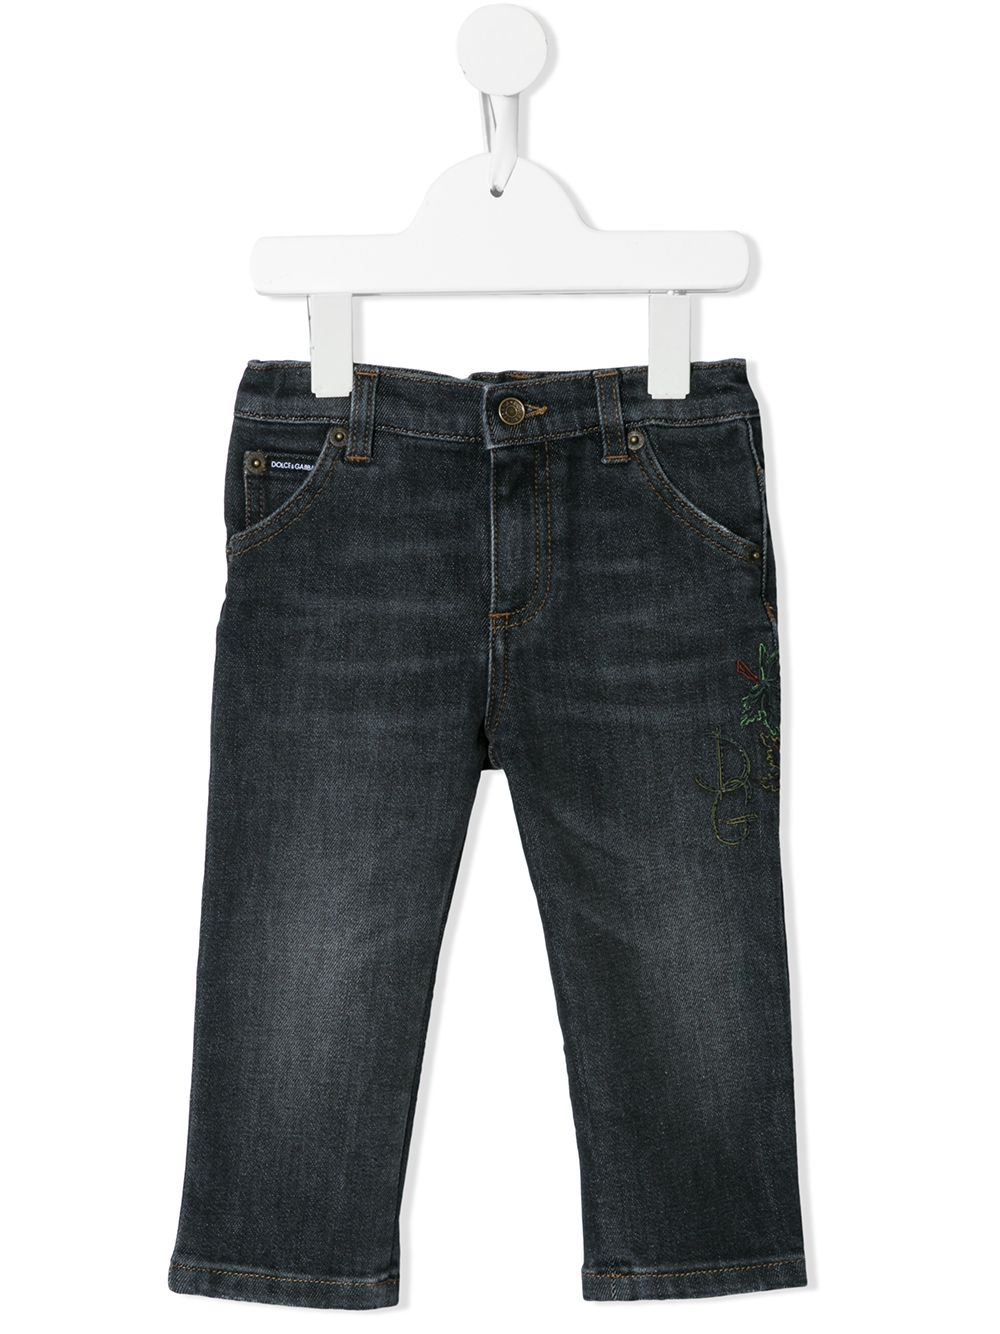 DOLCE & GABBANA EMBROIDERED LOGO JEANS